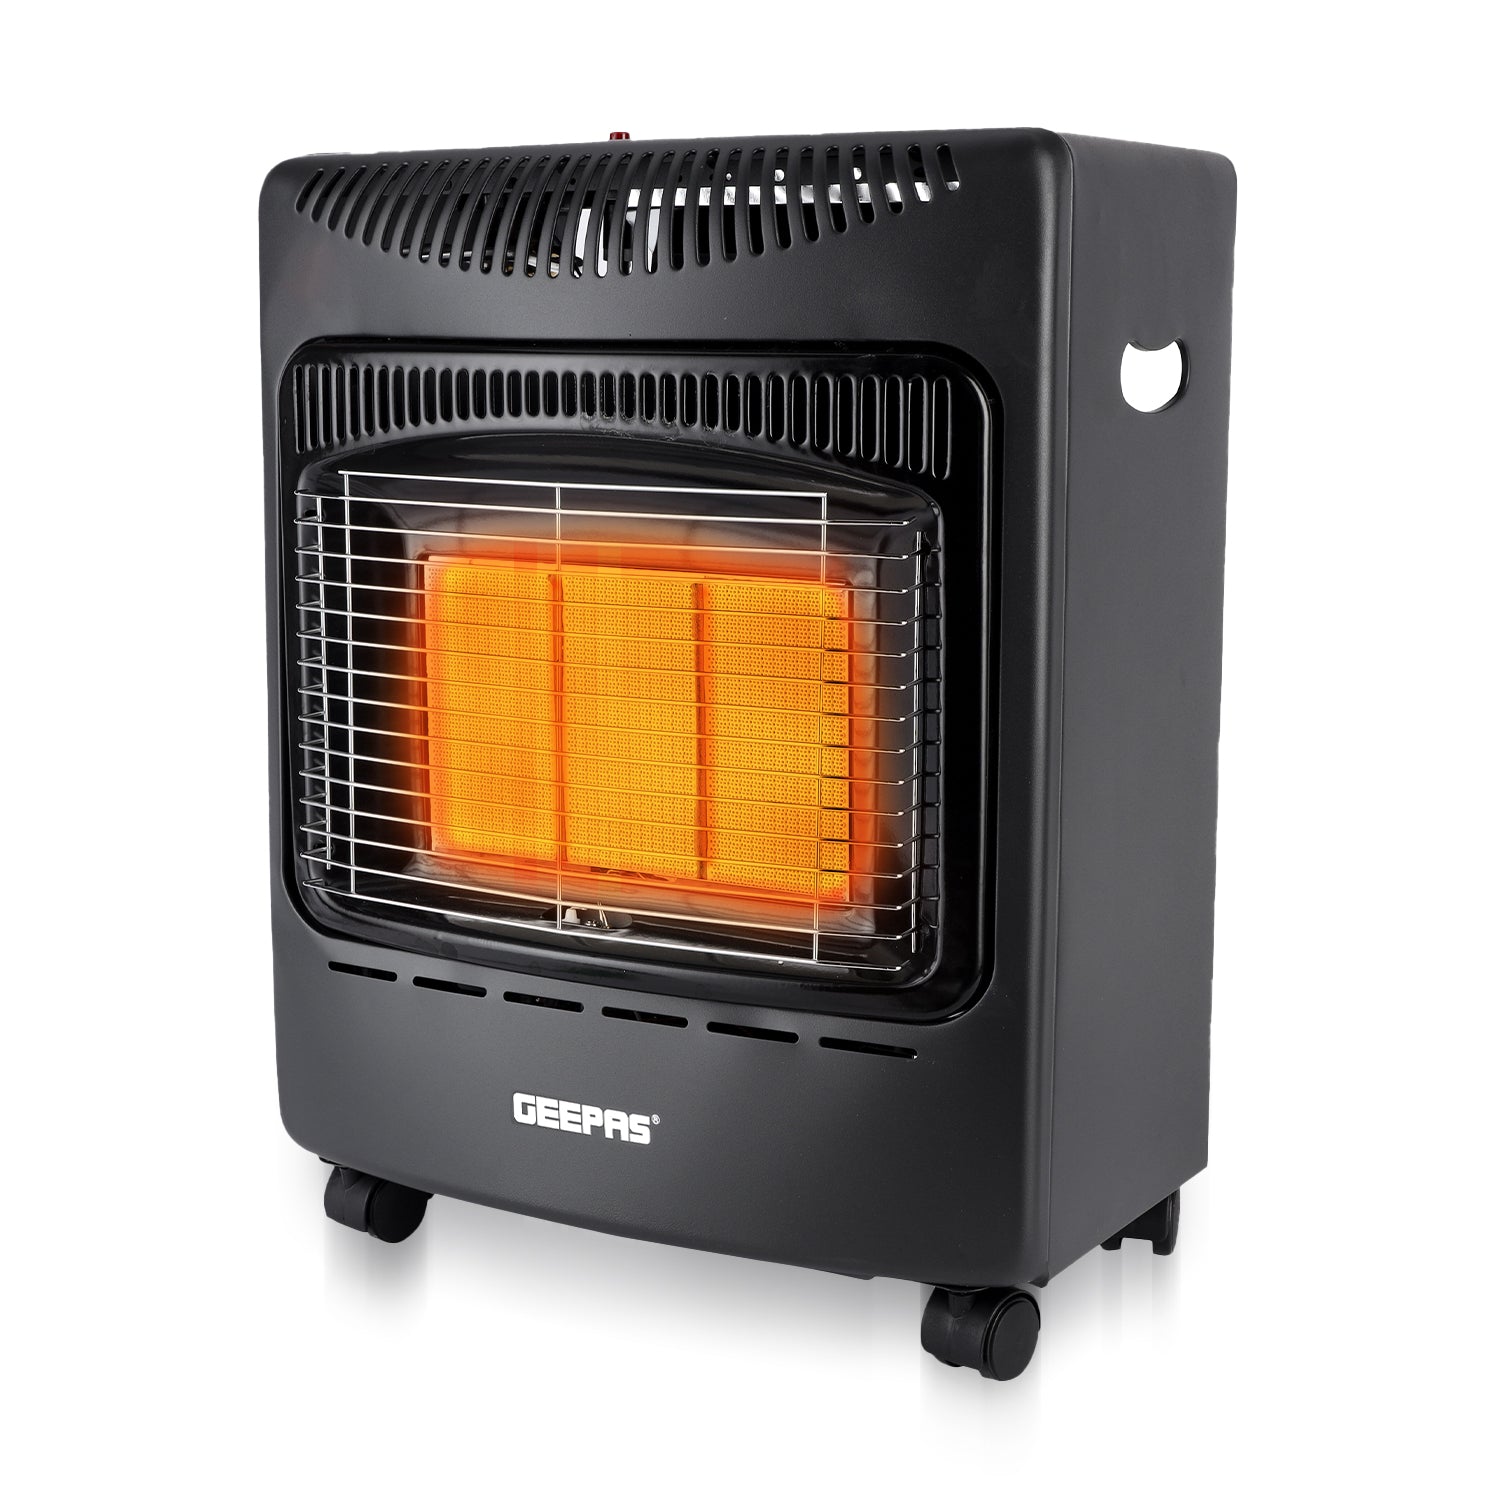 4.2KW Portable Indoor Gas Heater with Piezoelectric Ignition